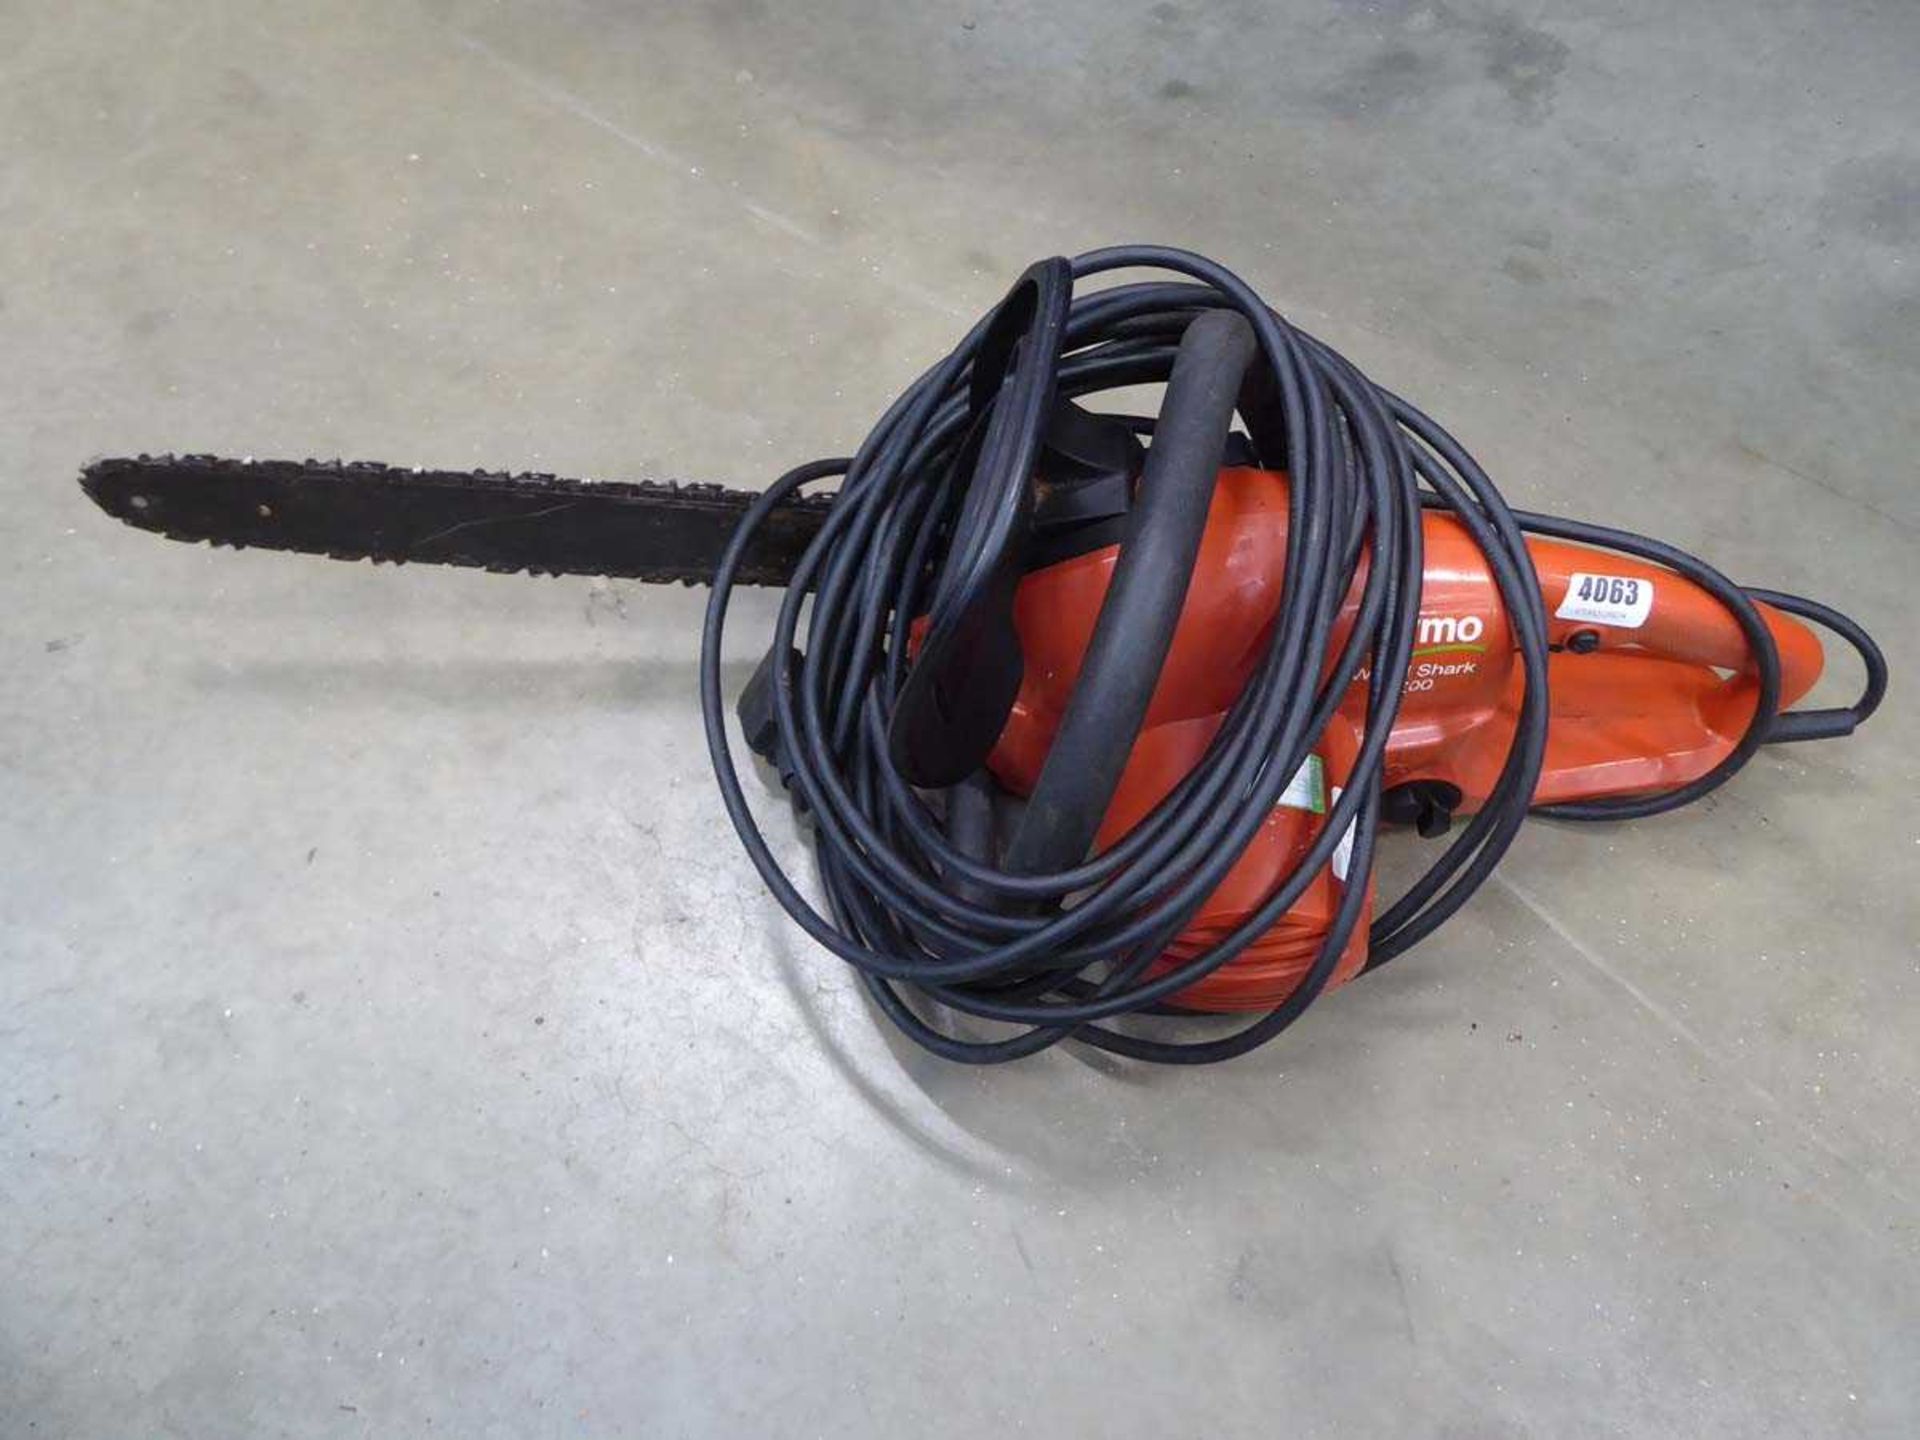 Flymo Woodshark 220 electric chainsaw - Image 2 of 2